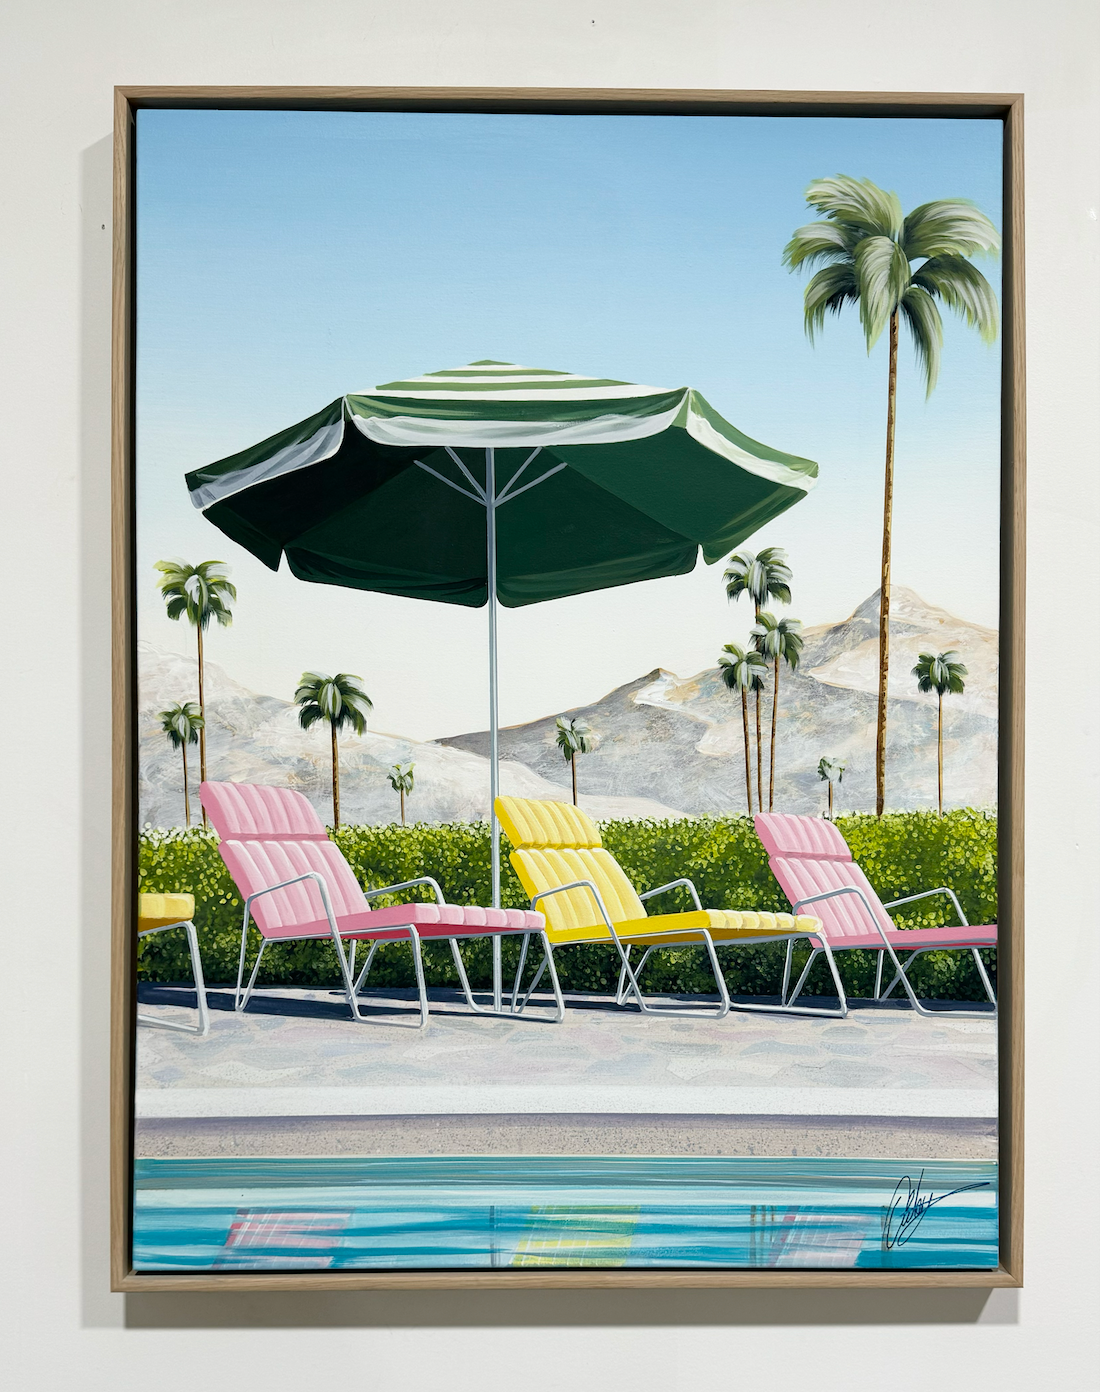 Reflections of Relaxation - Framed - 80 x 105cm